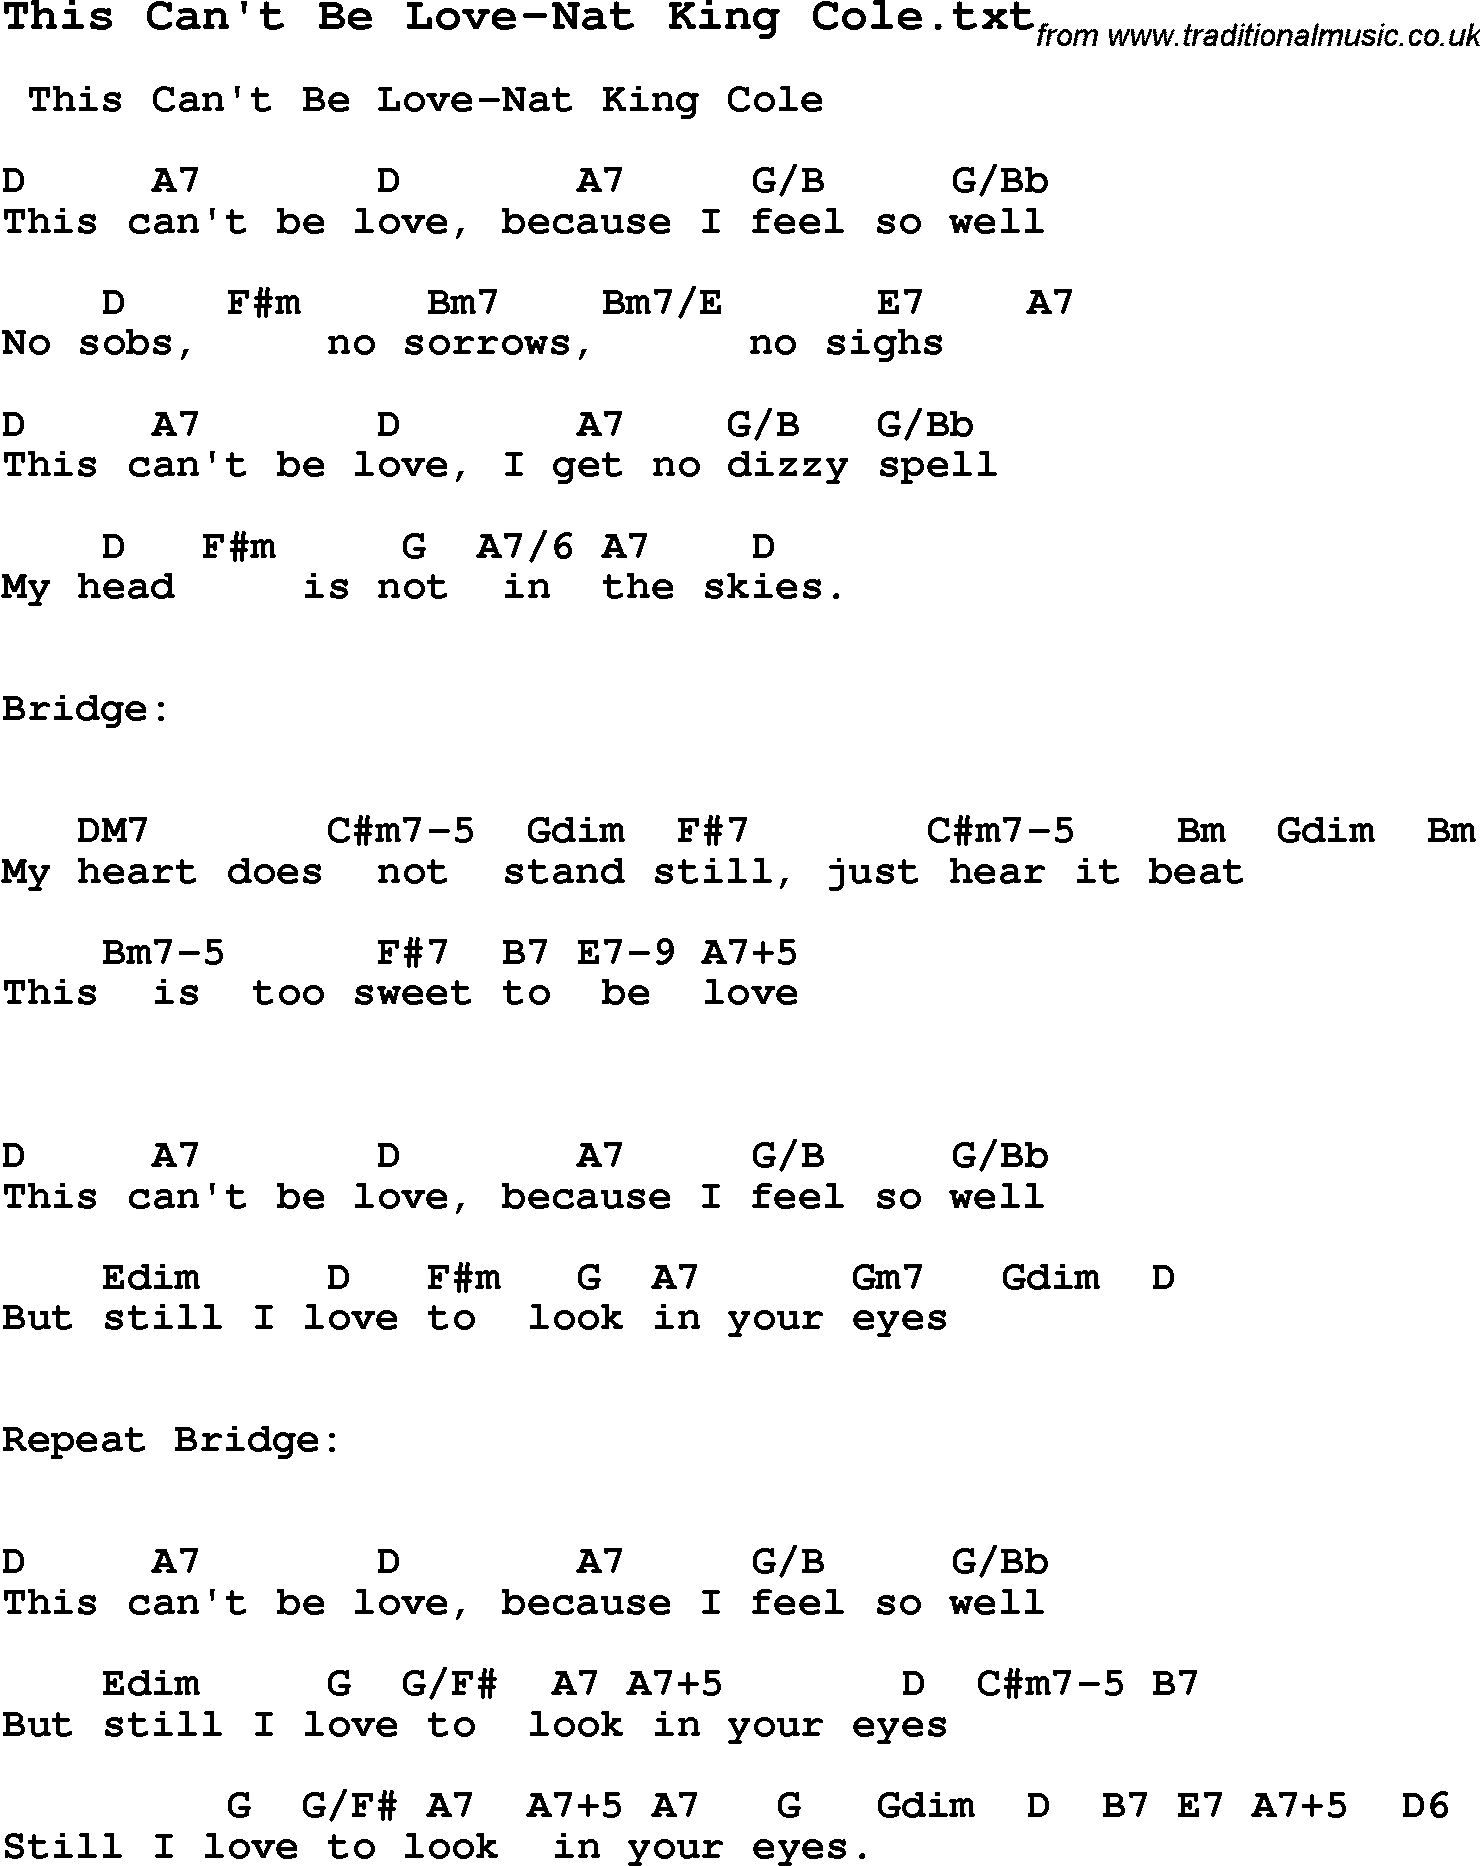 ... with chords, tabs and lyrics - This Can't Be Love-Nat King Cole